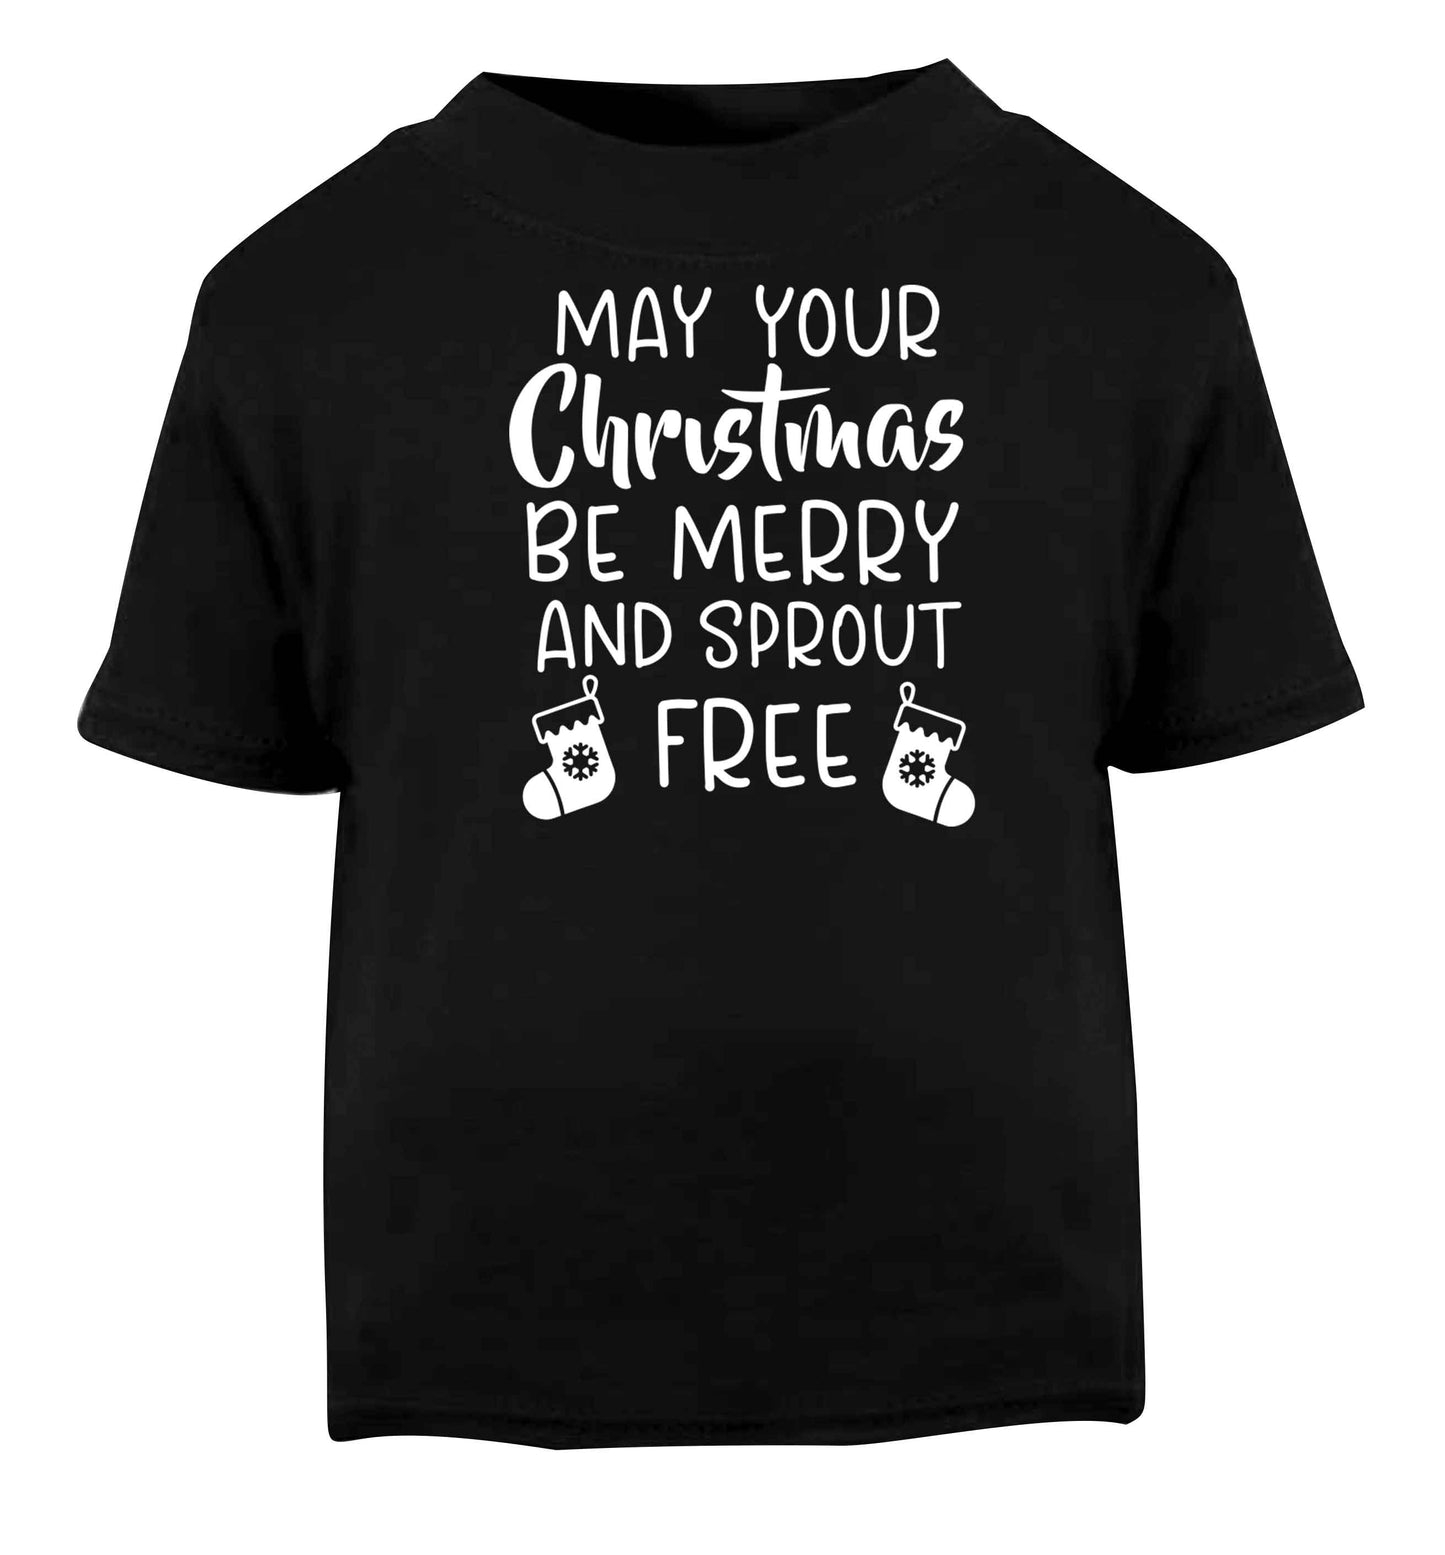 May your Christmas be merry and sprout free Black baby toddler Tshirt 2 years